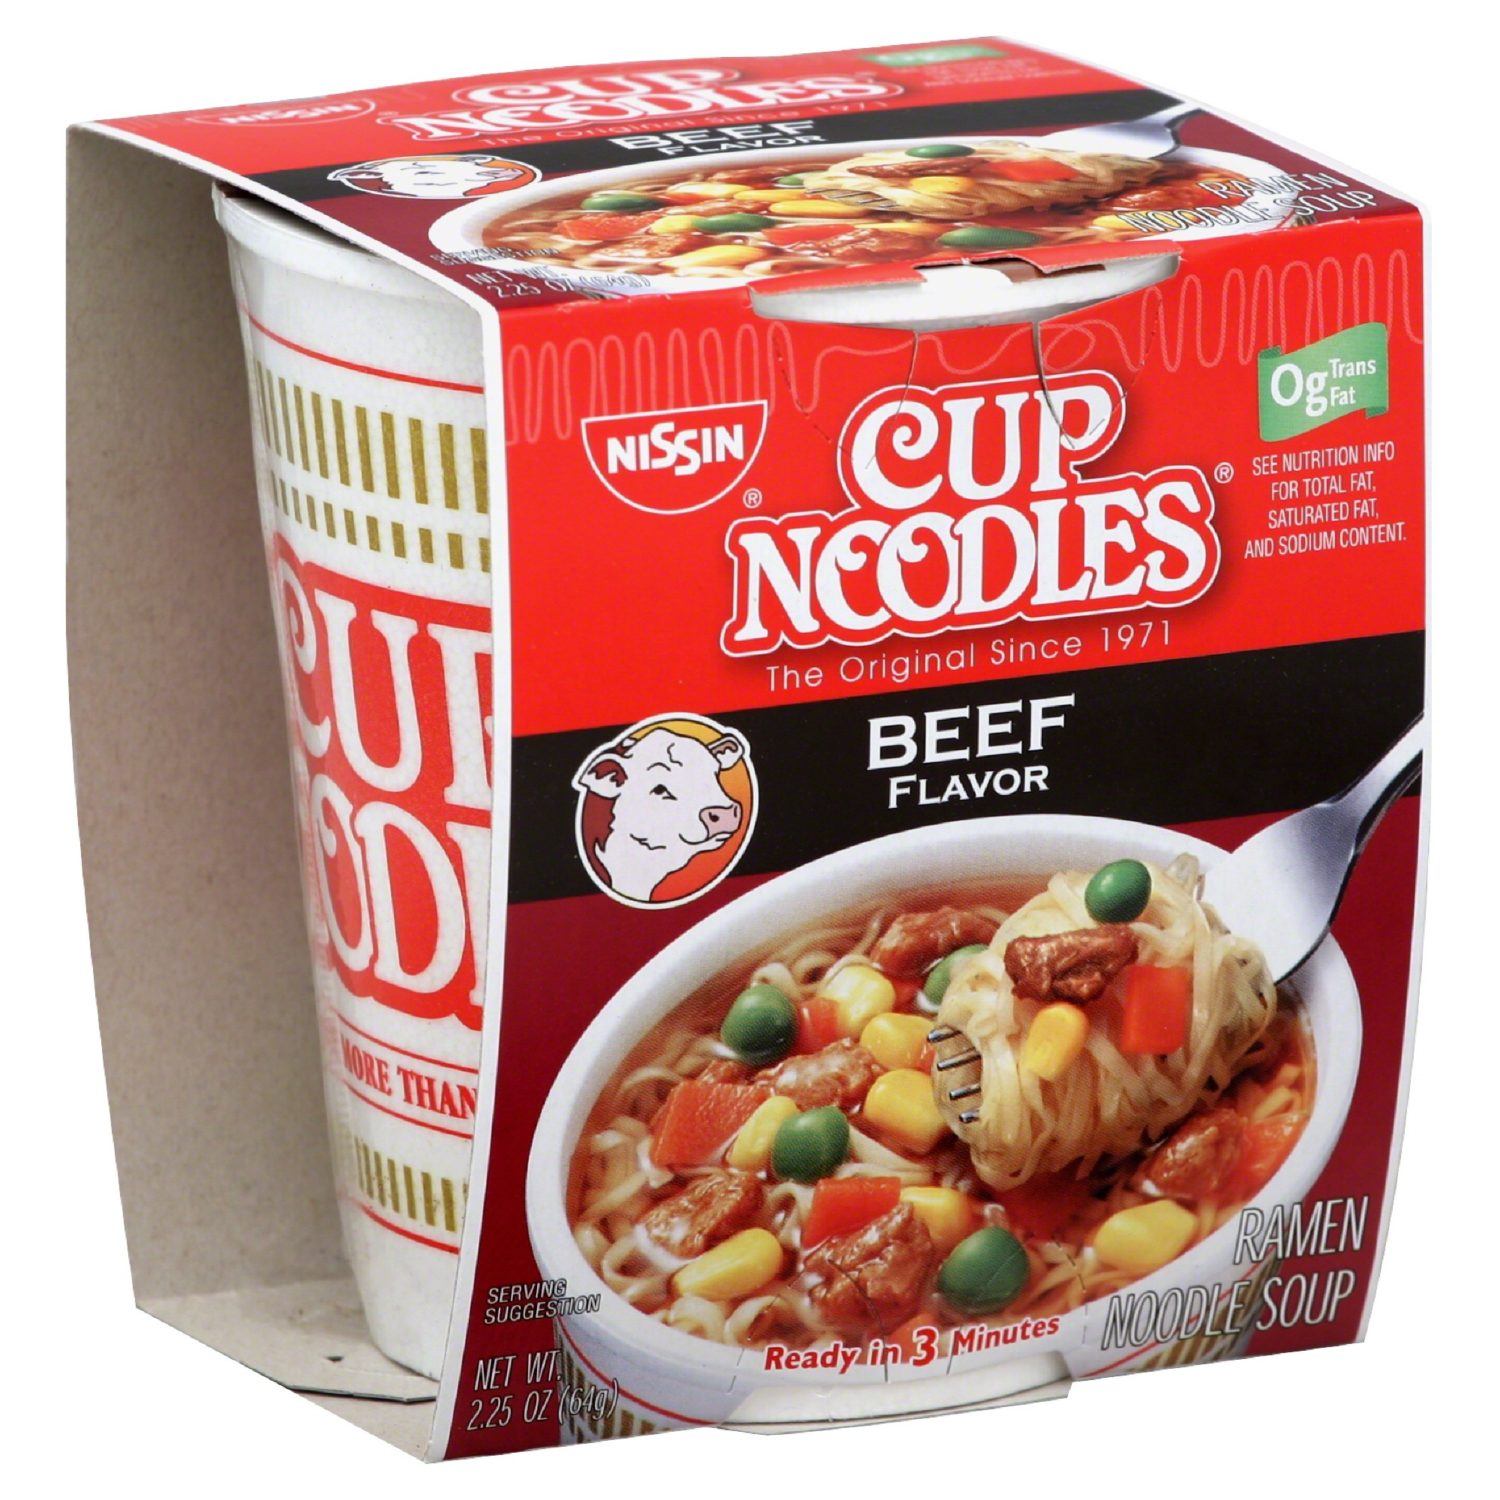 Ramen Beef Flavor Noodles Soup Cup from Nissin | Nurtrition & Price